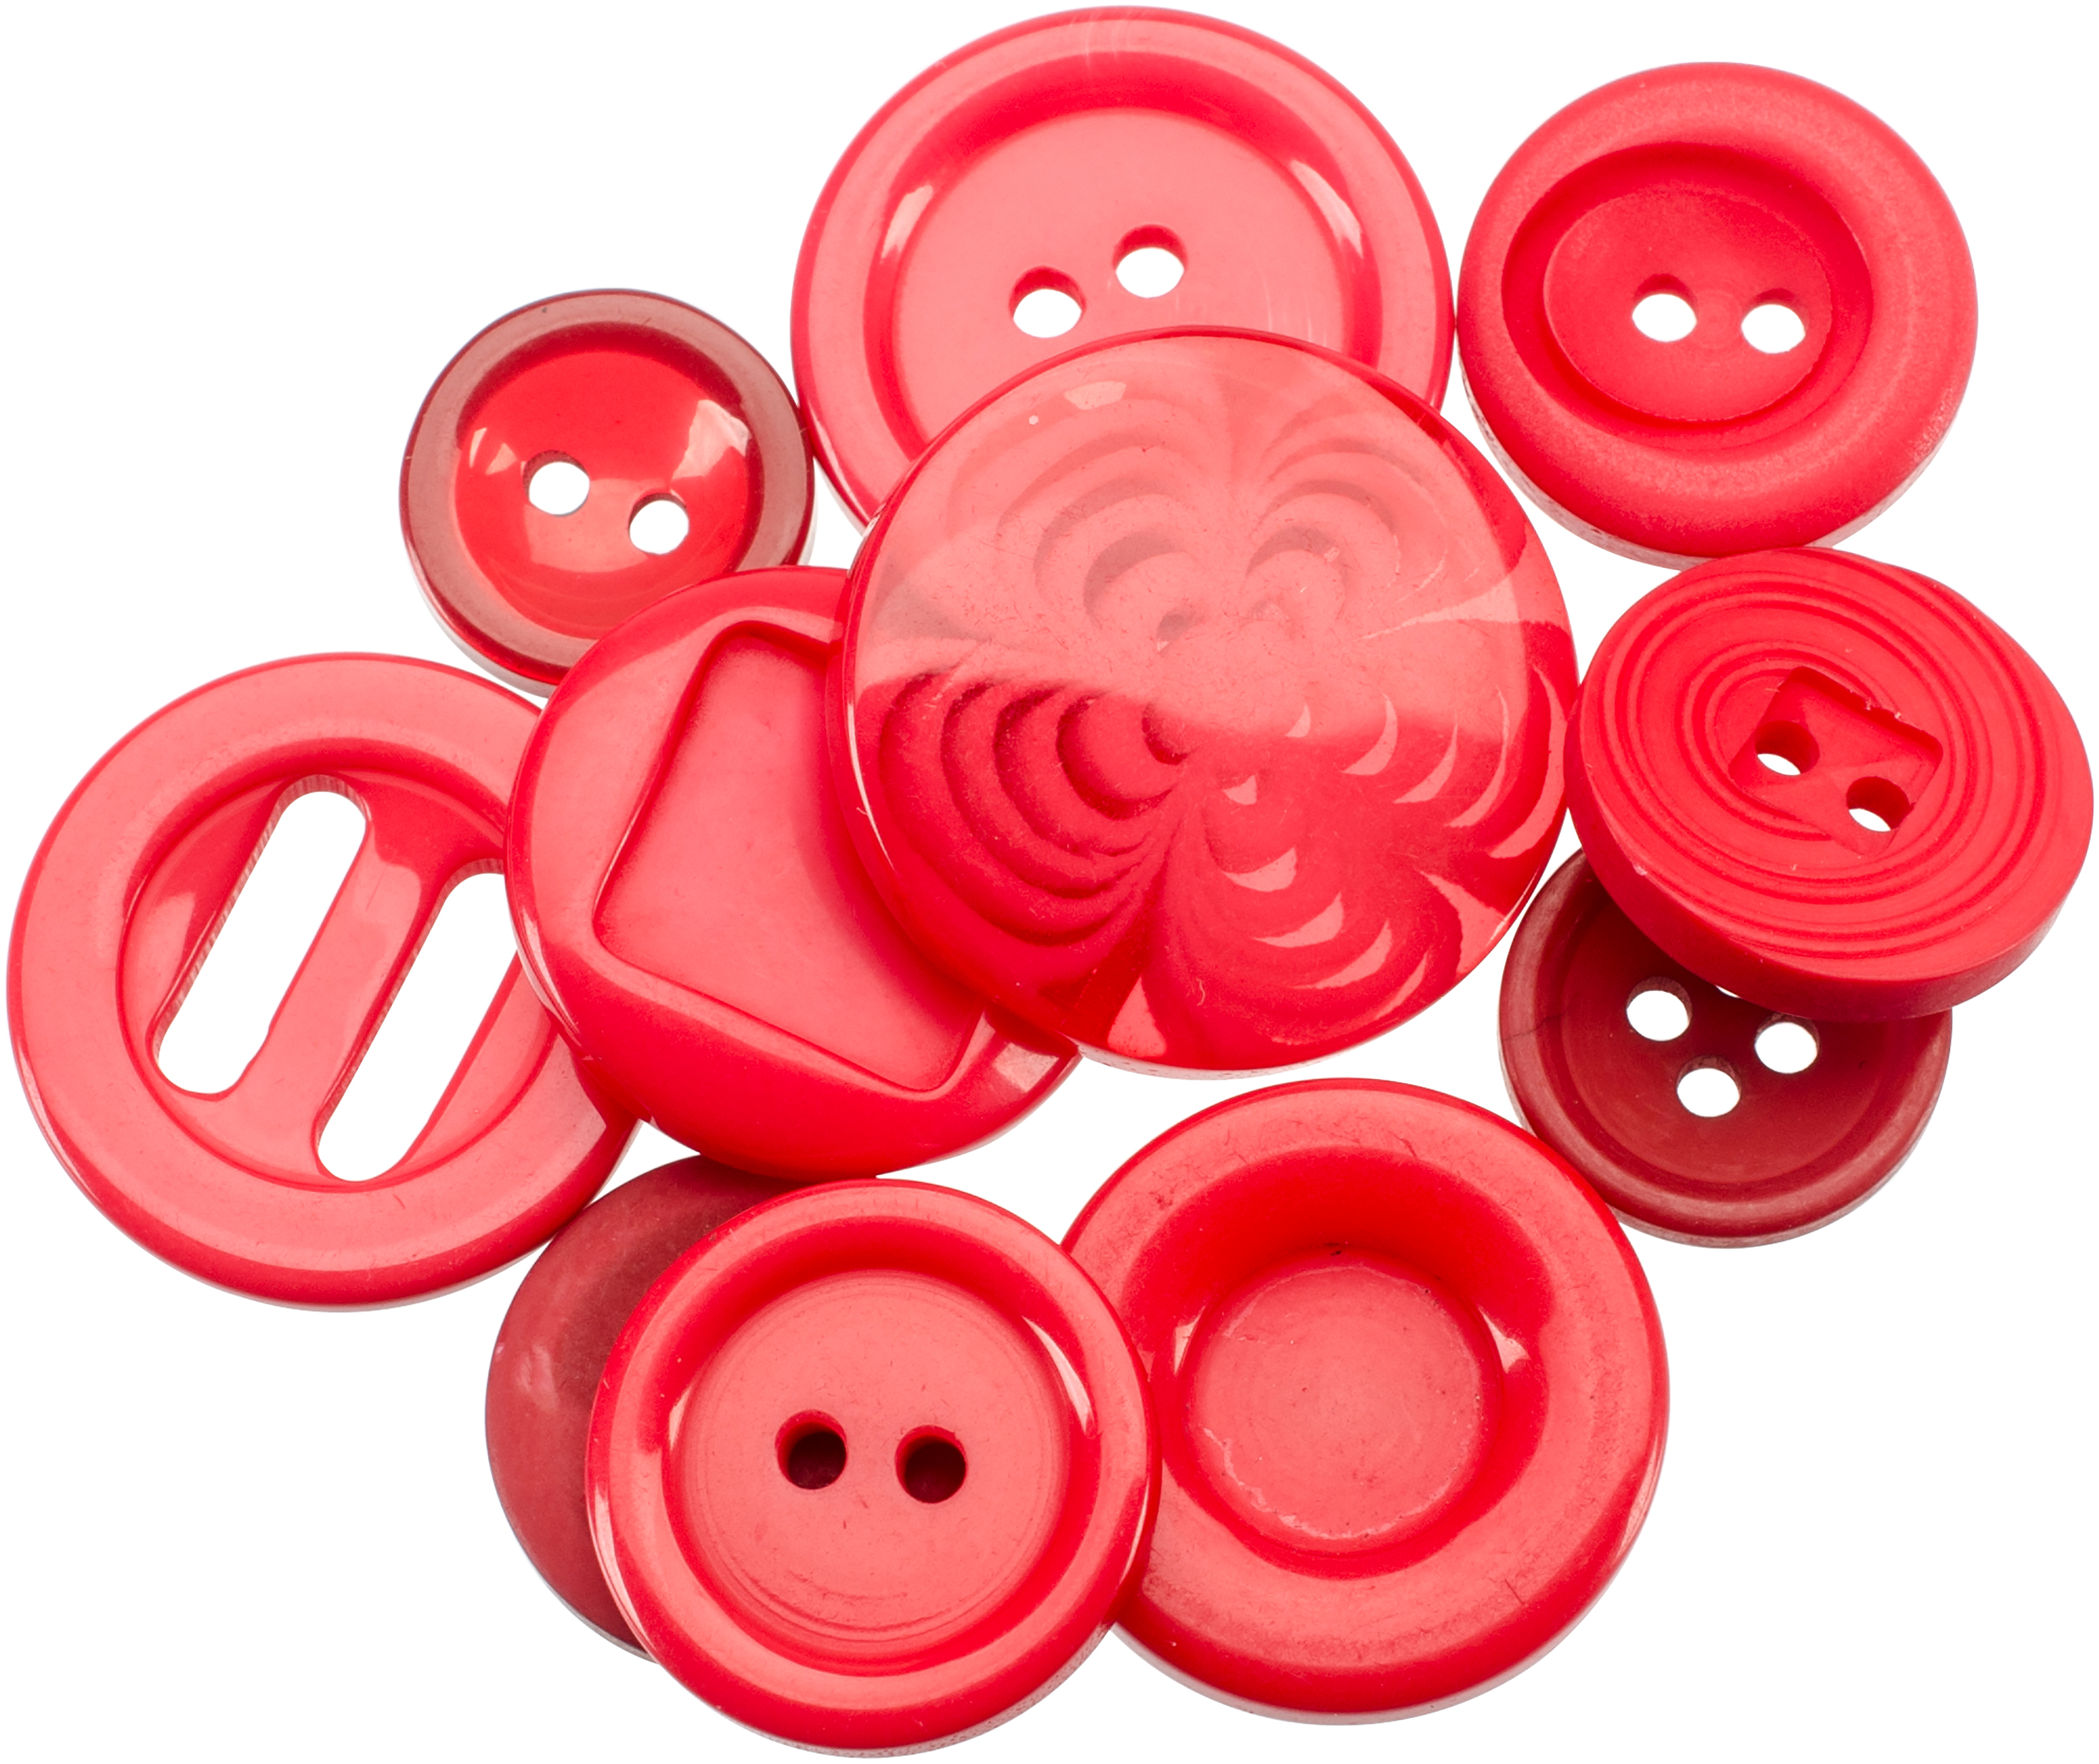 Le Bouton Red Button Jar, 4 Oz. - image 2 of 2